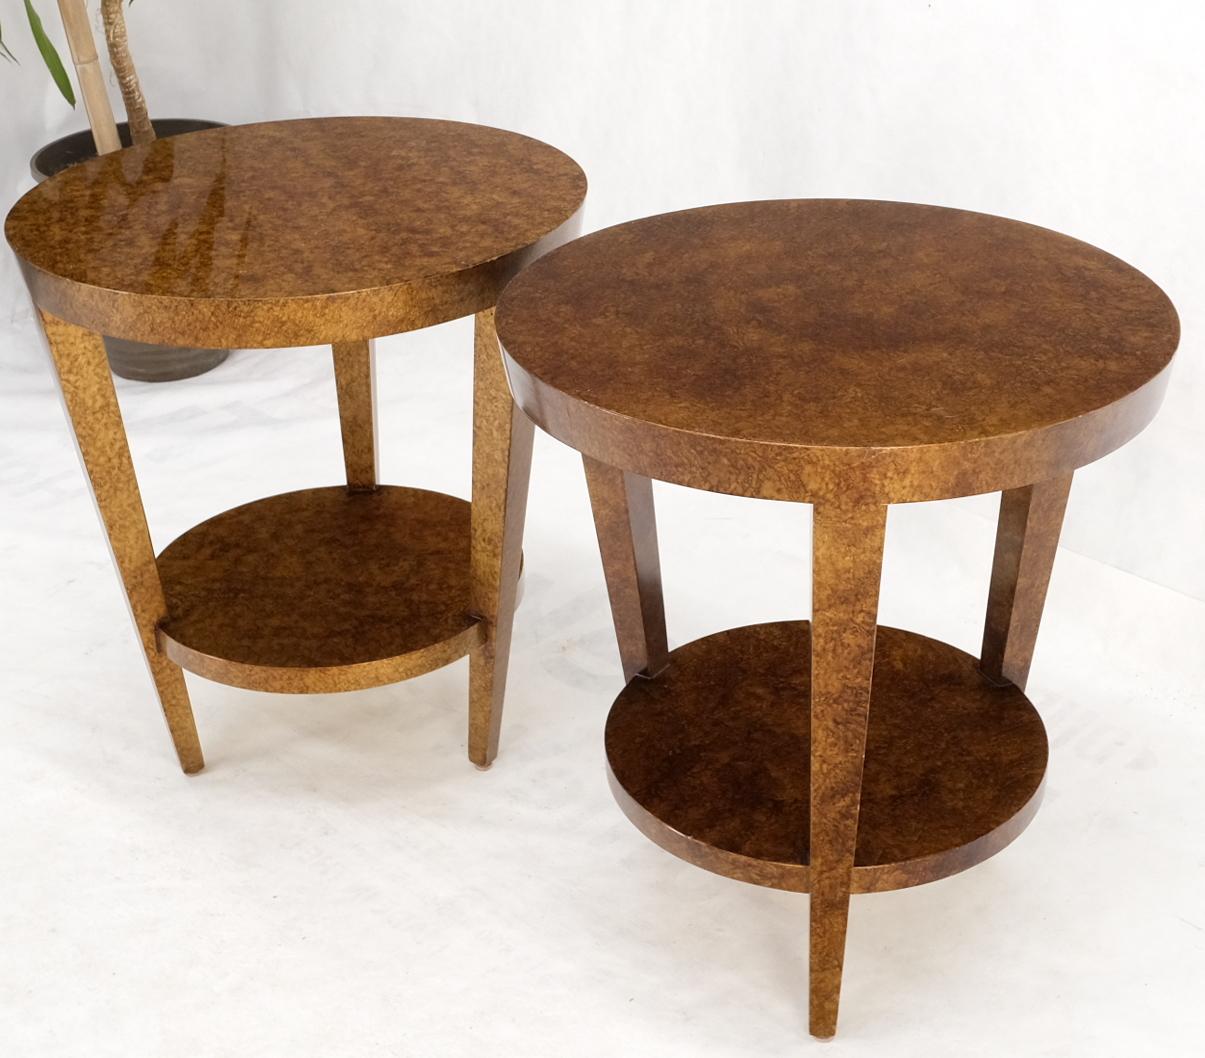 20th Century Pair of Round Two Tier Tortoiseshell Side End Tables Stands Pedestals